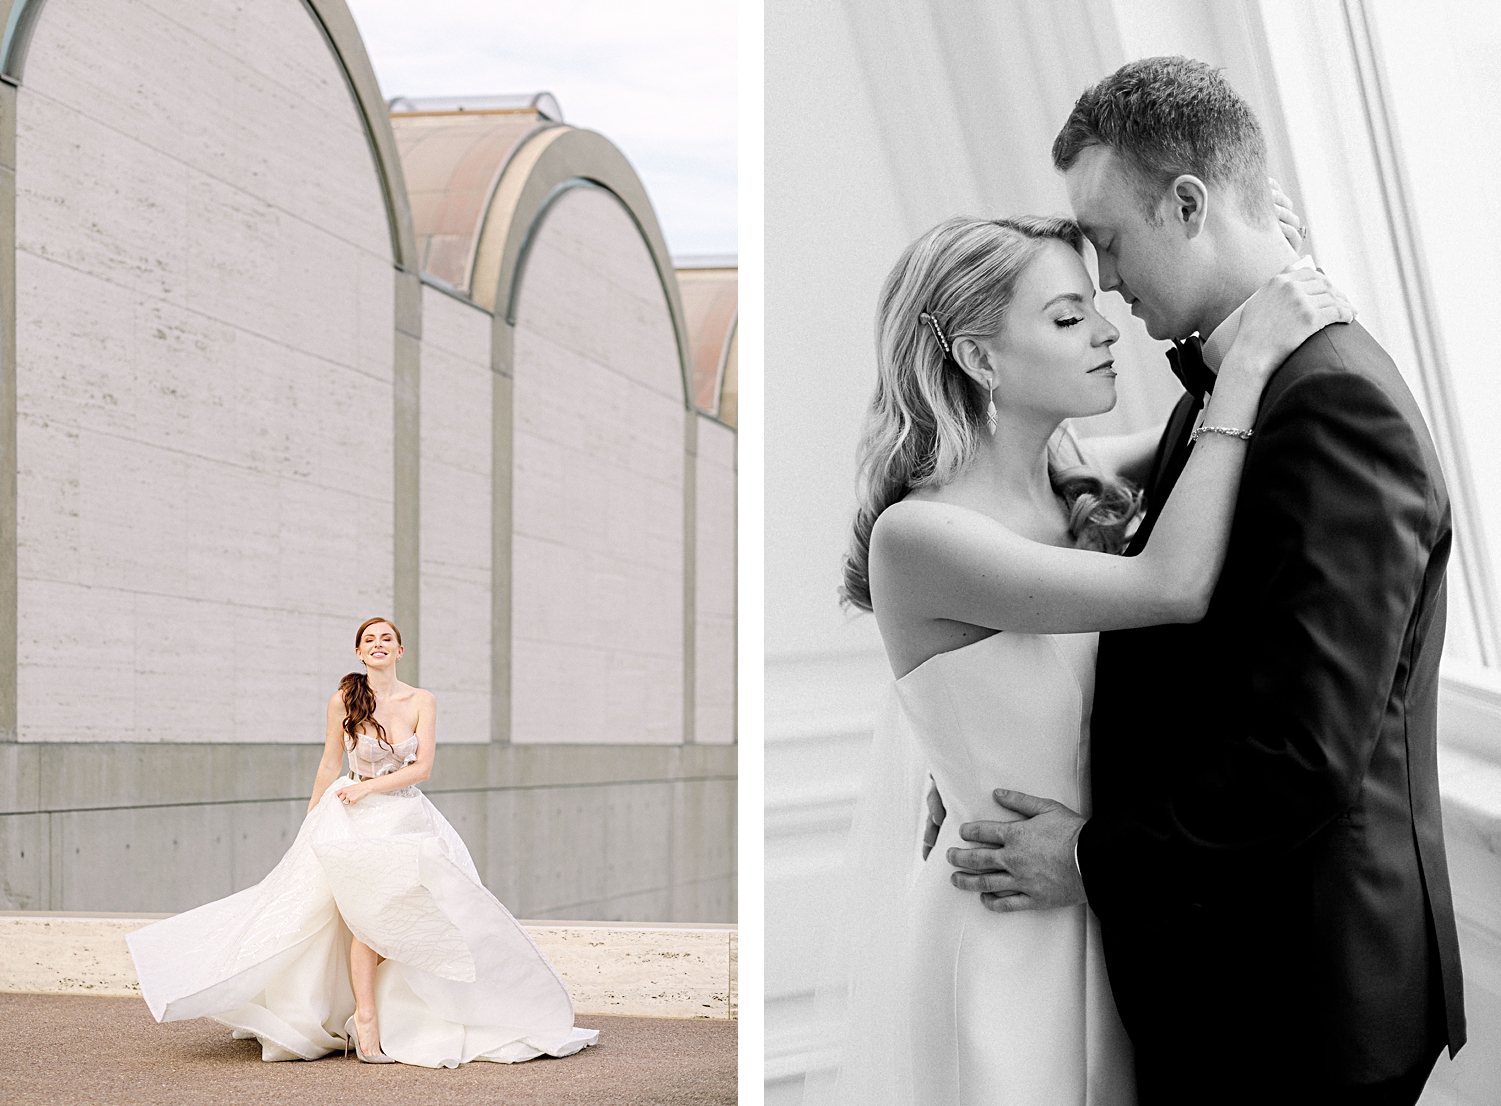 couple at wedding venues nyc embracing black and white wedding dress